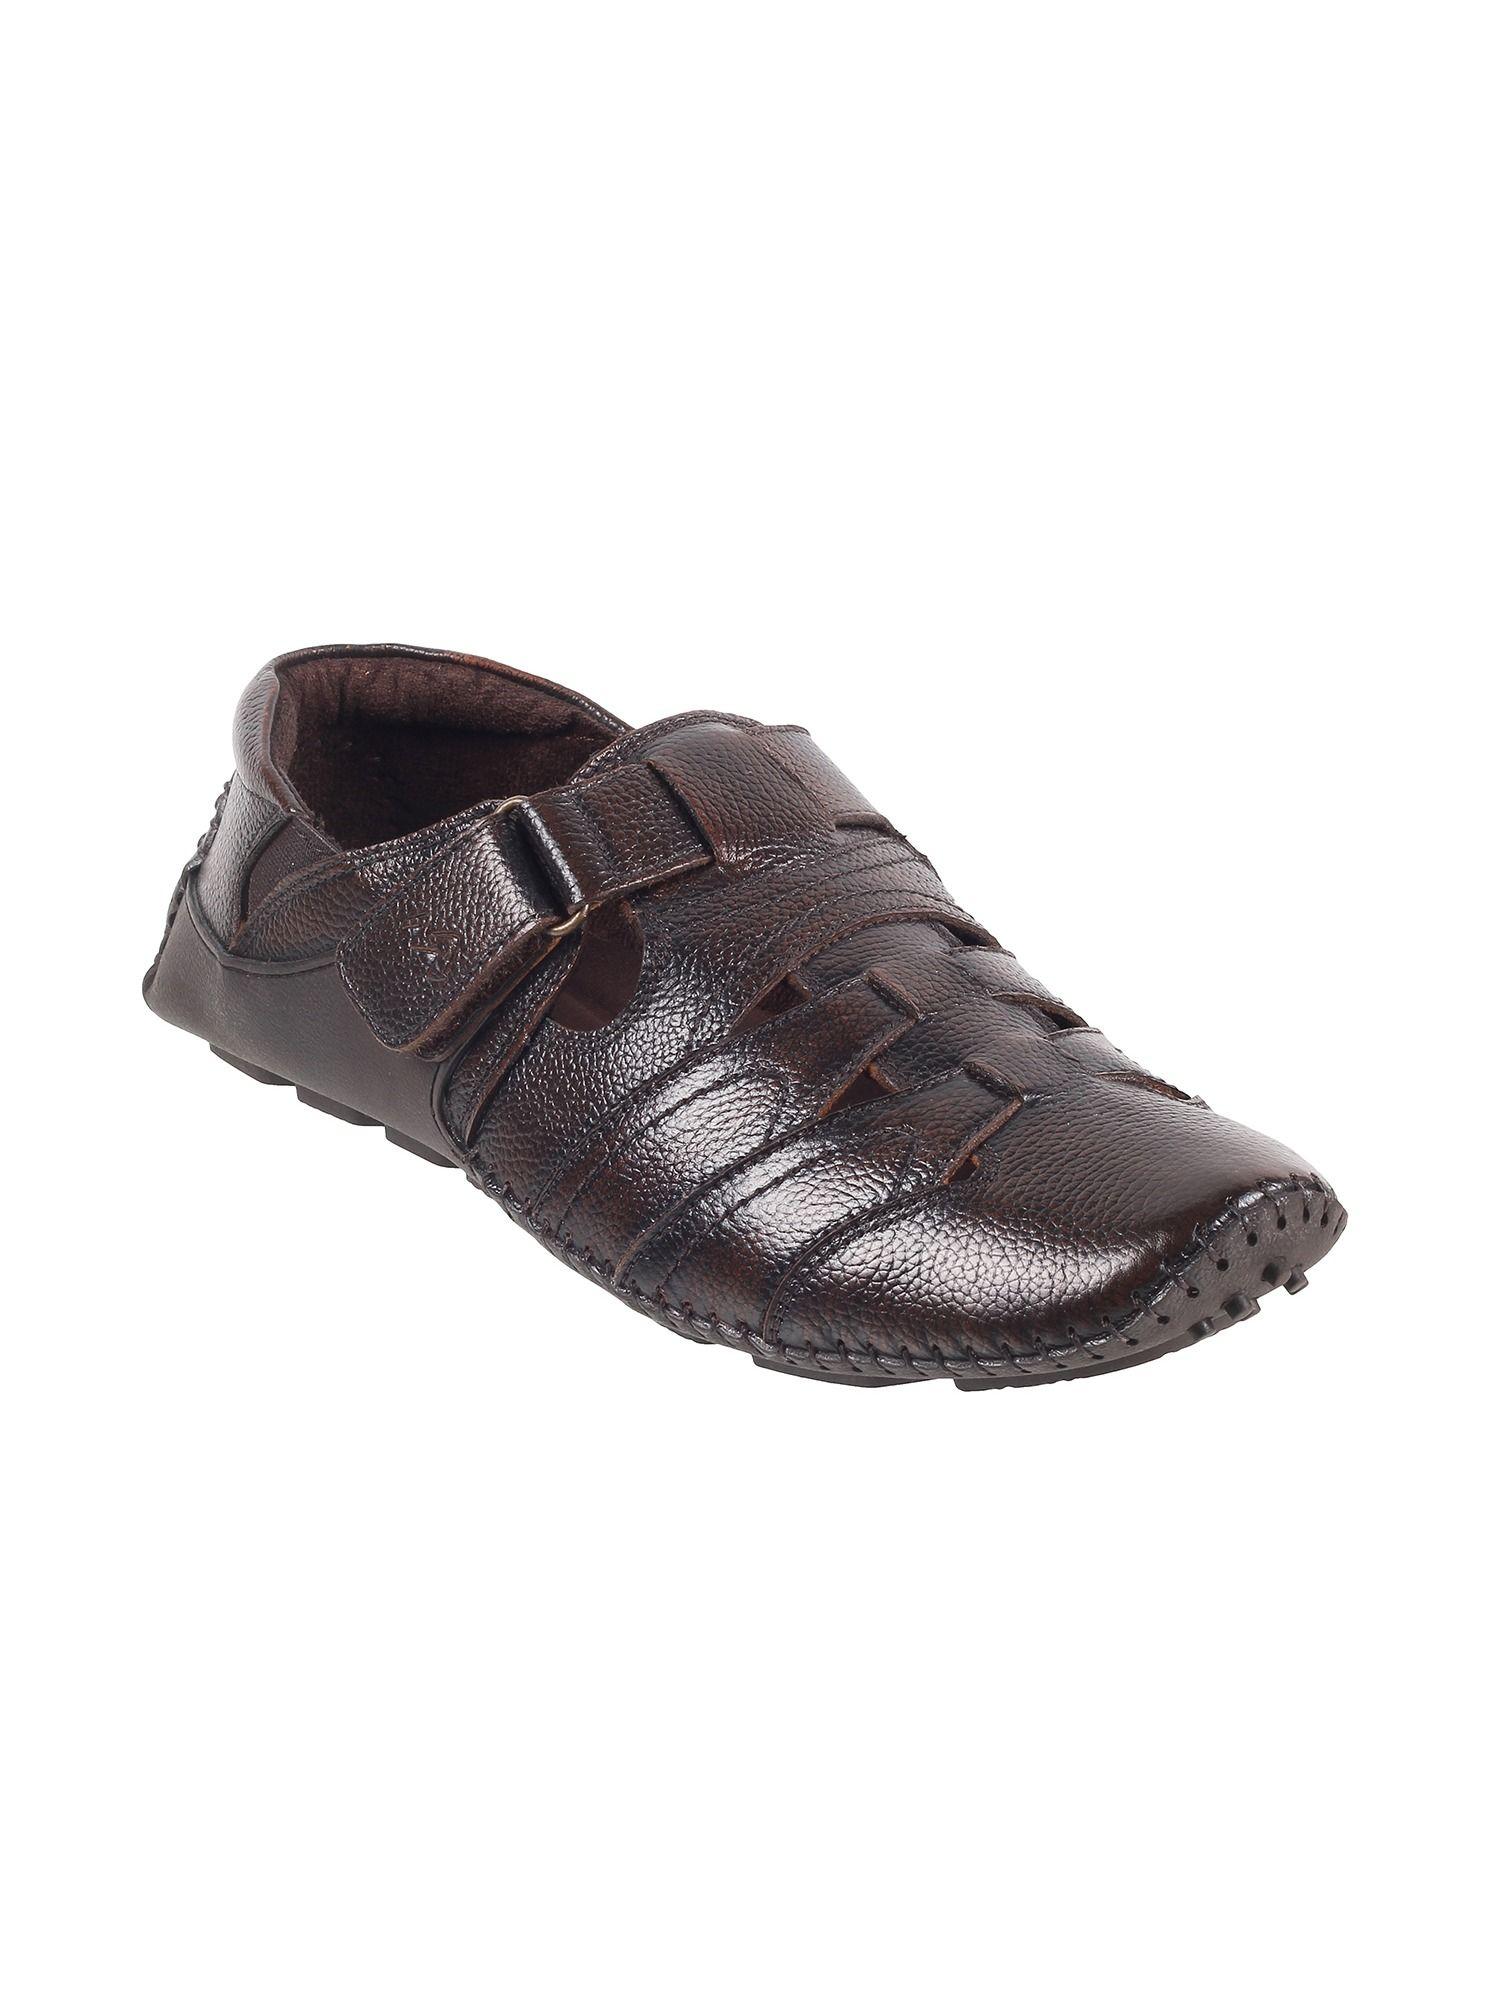 mens brown flat casual sandalsmetro brown solid sandals